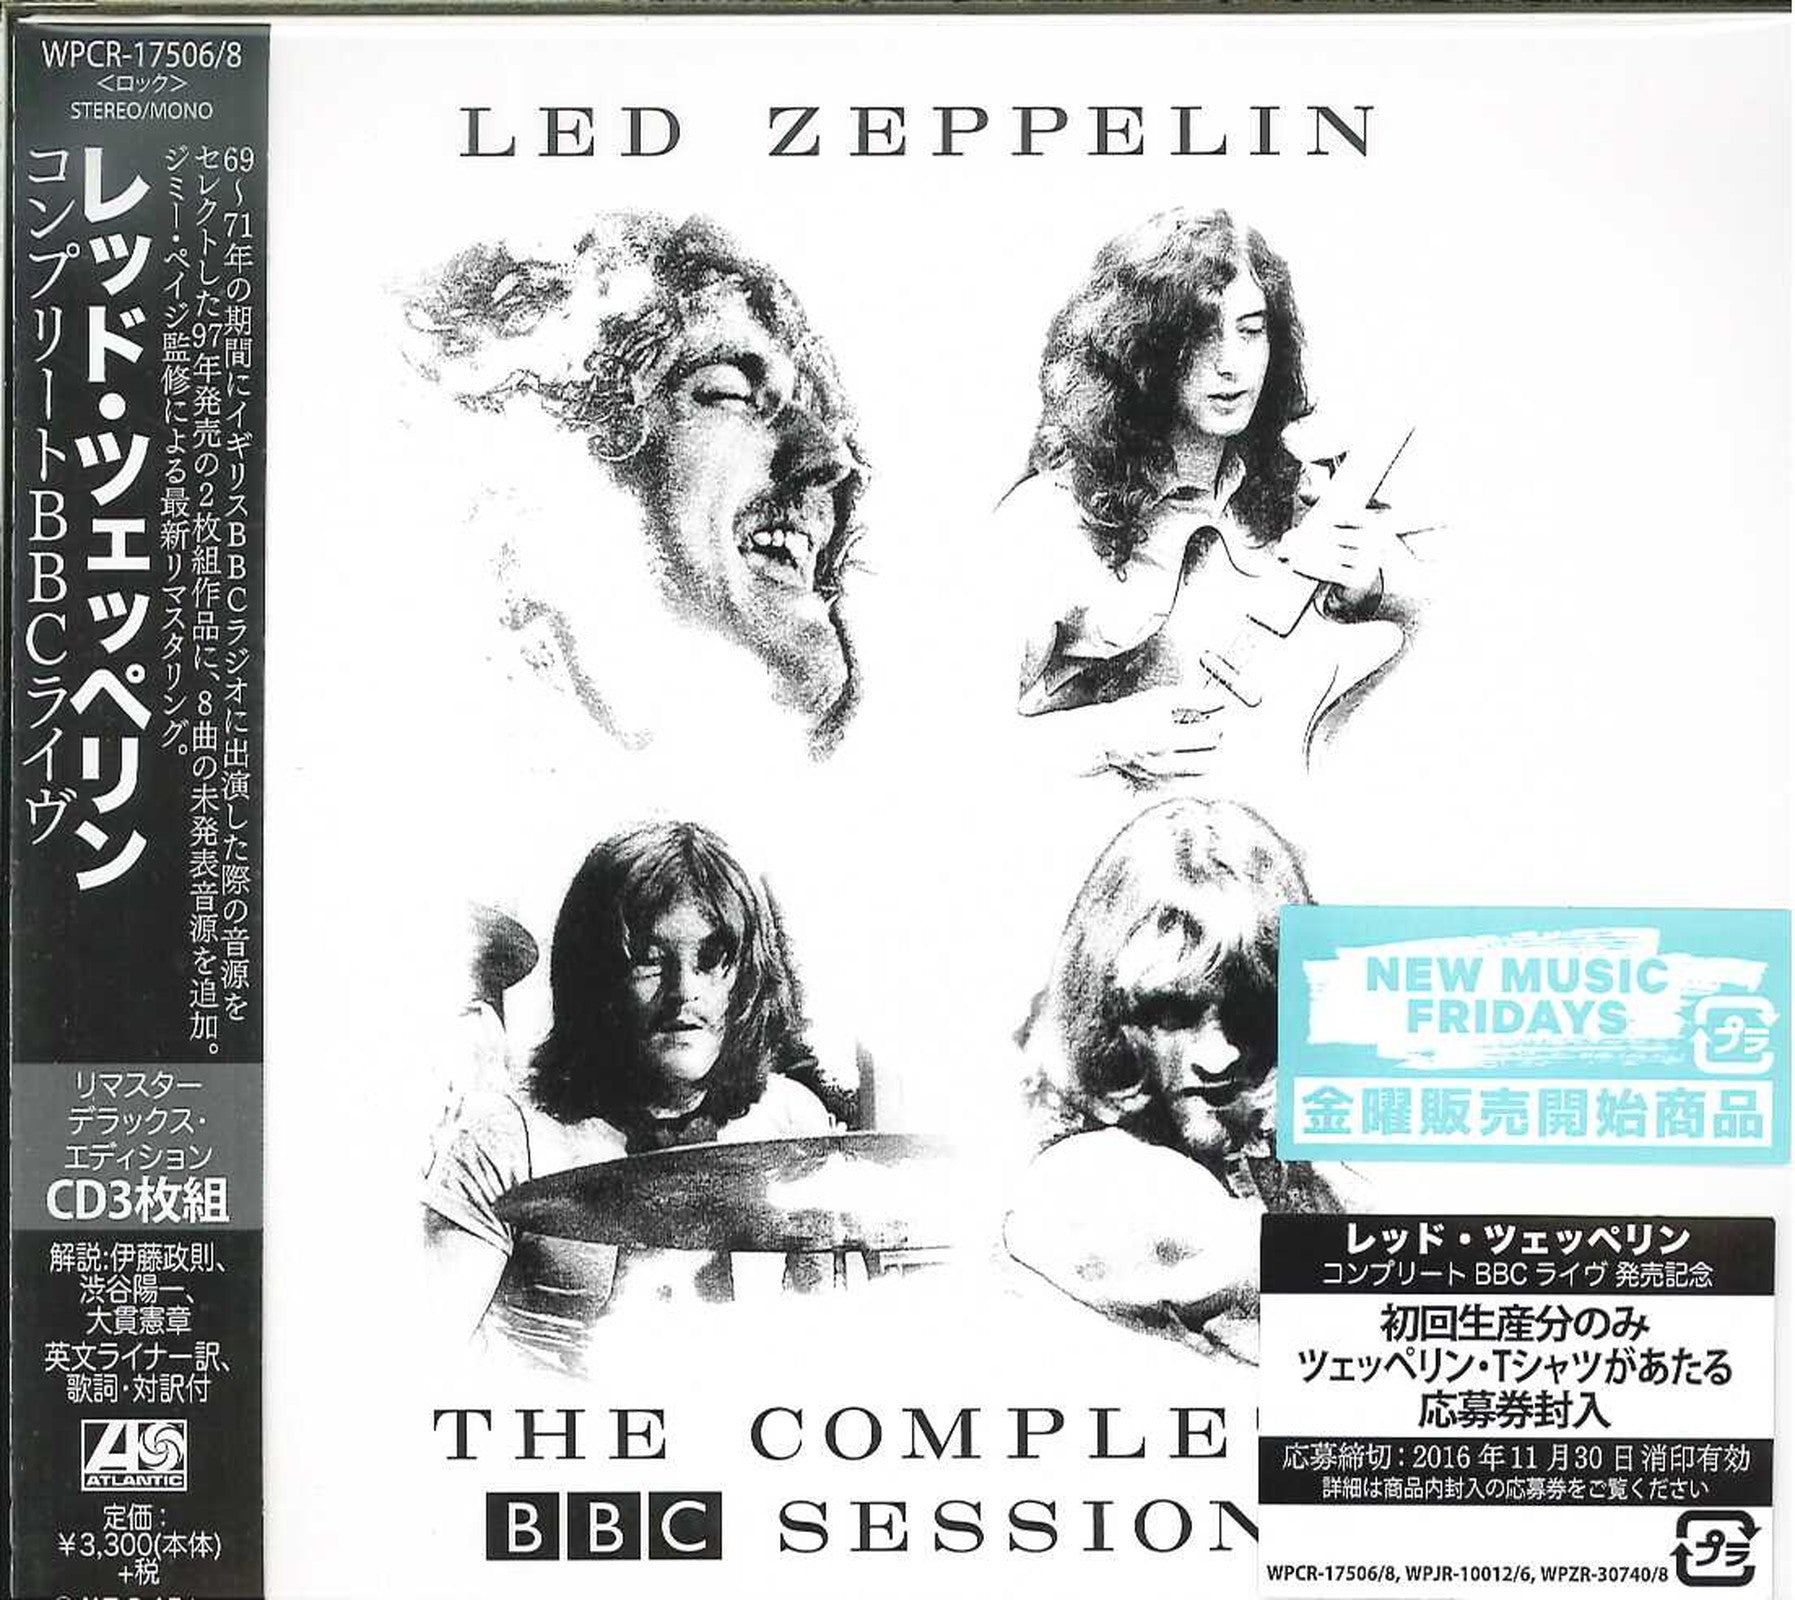 sofa farve opretholde Led Zeppelin - The Complete Bbc Sessions Deluxe Edition - Japan 3 CD - CDs  Vinyl Japan Store